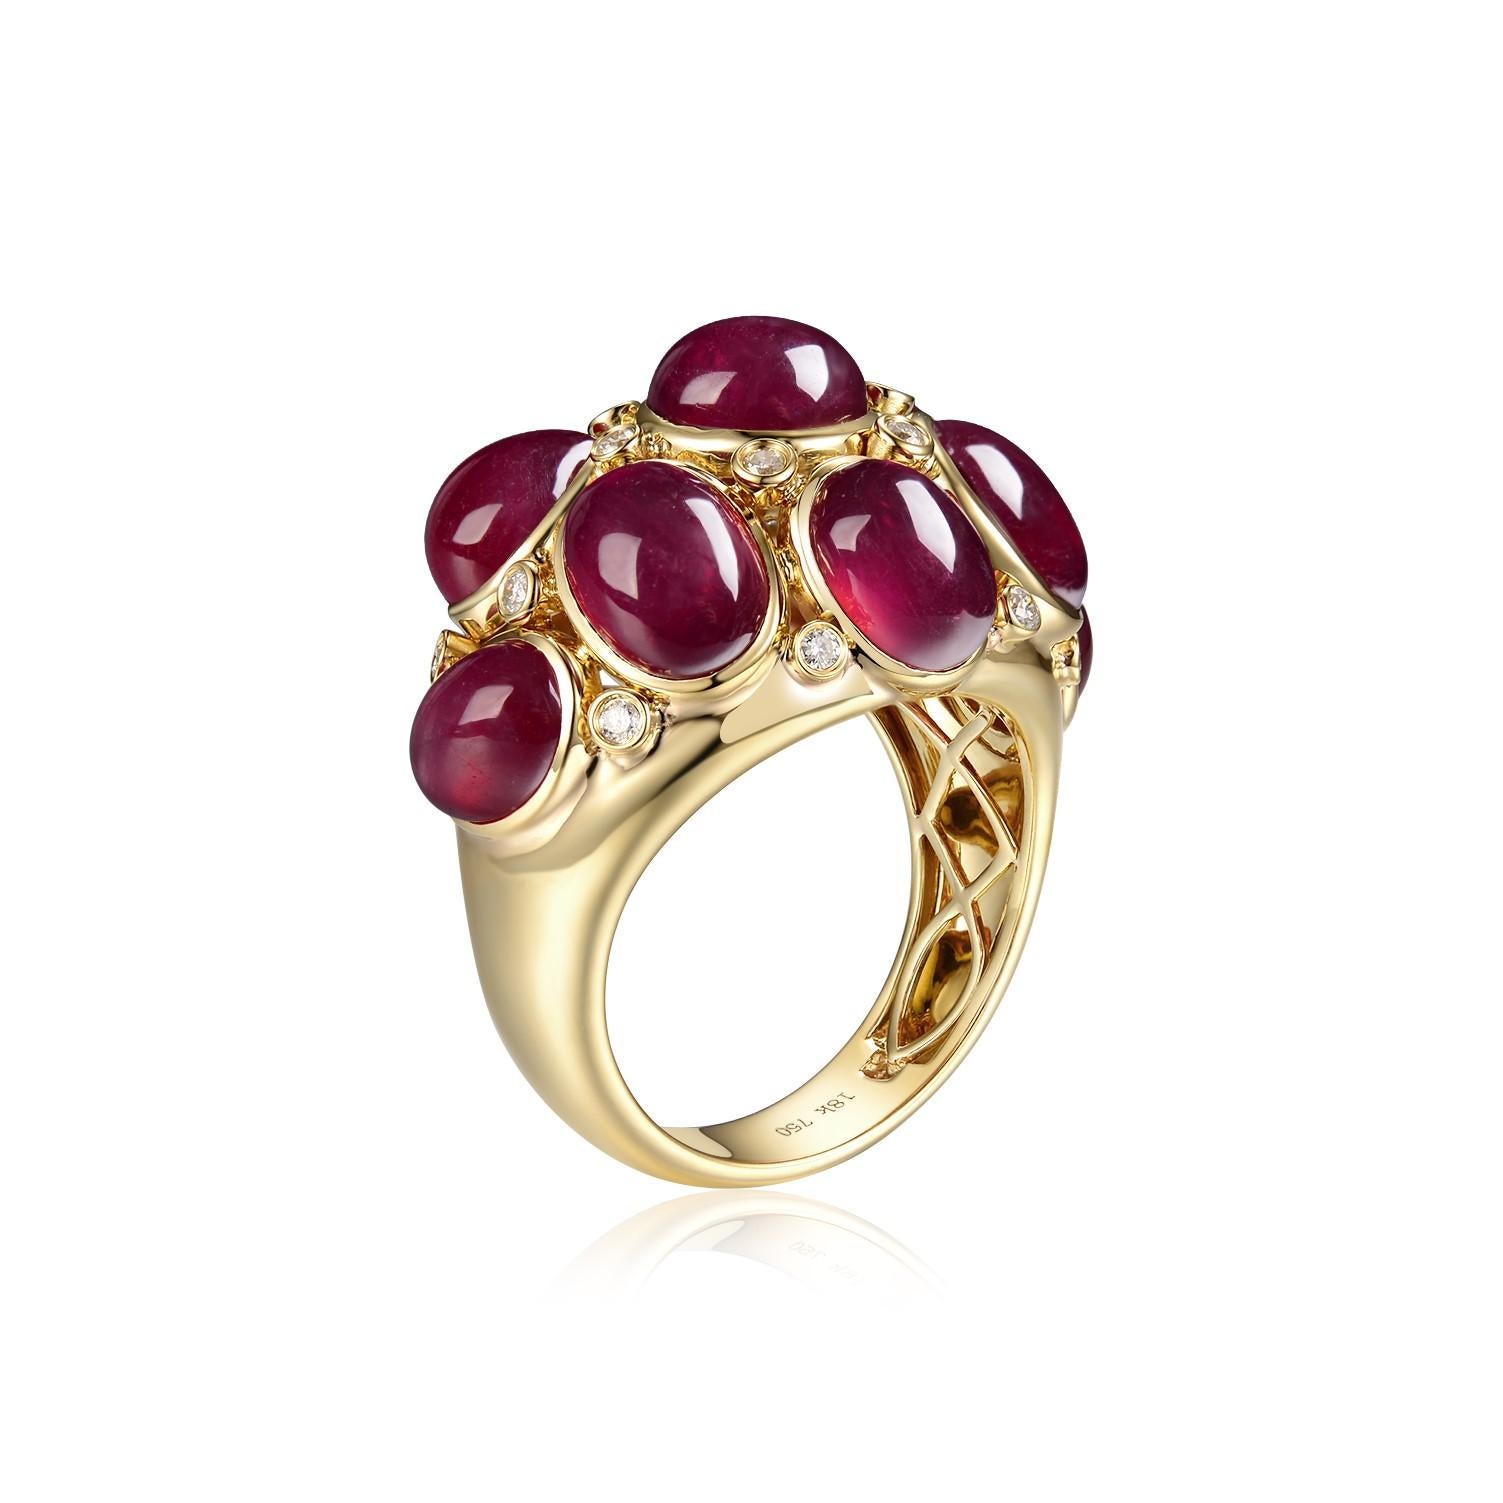 This dome ring is the perfect way to add a touch of glamour to your wardrobe. With 9 cabochon rubies and a total weight of 16.78 carats, this piece will look great with any outfit. The 18 karat yellow gold setting gives it an antique feel that goes